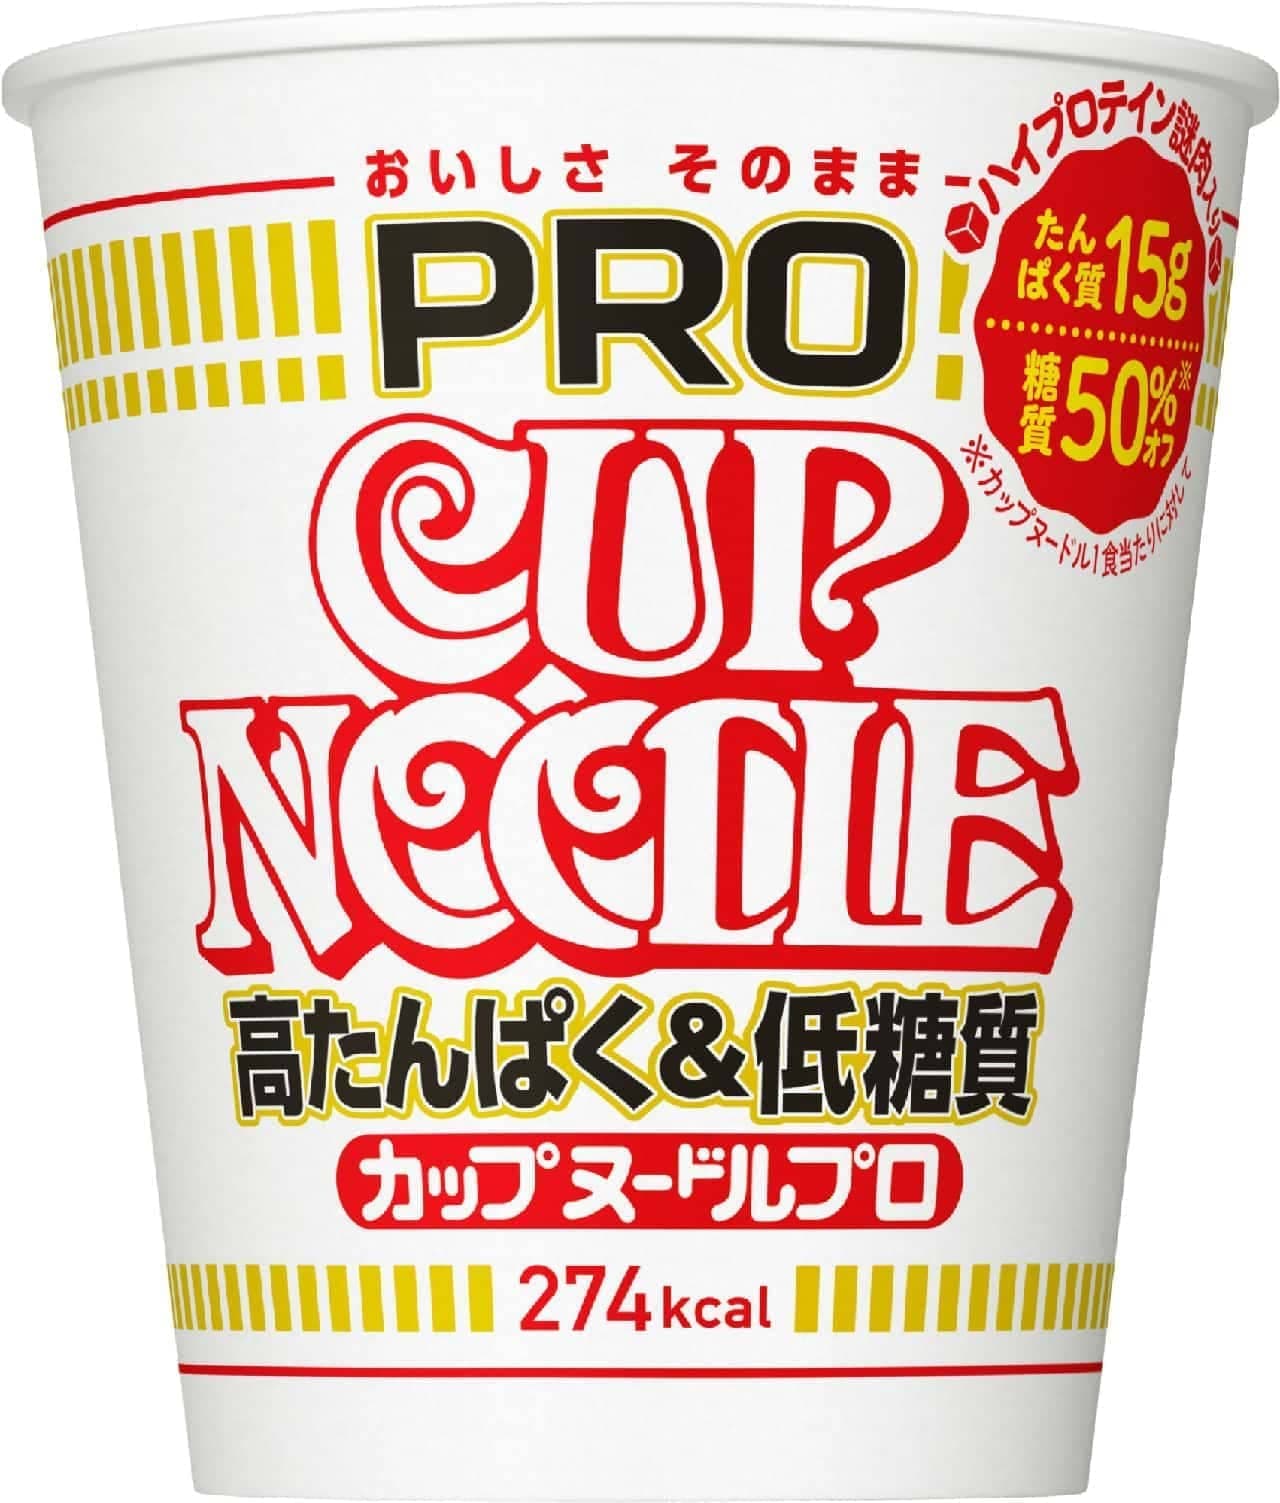 Nissin Foods "Cup Noodle PRO High Protein & Low Sugar"